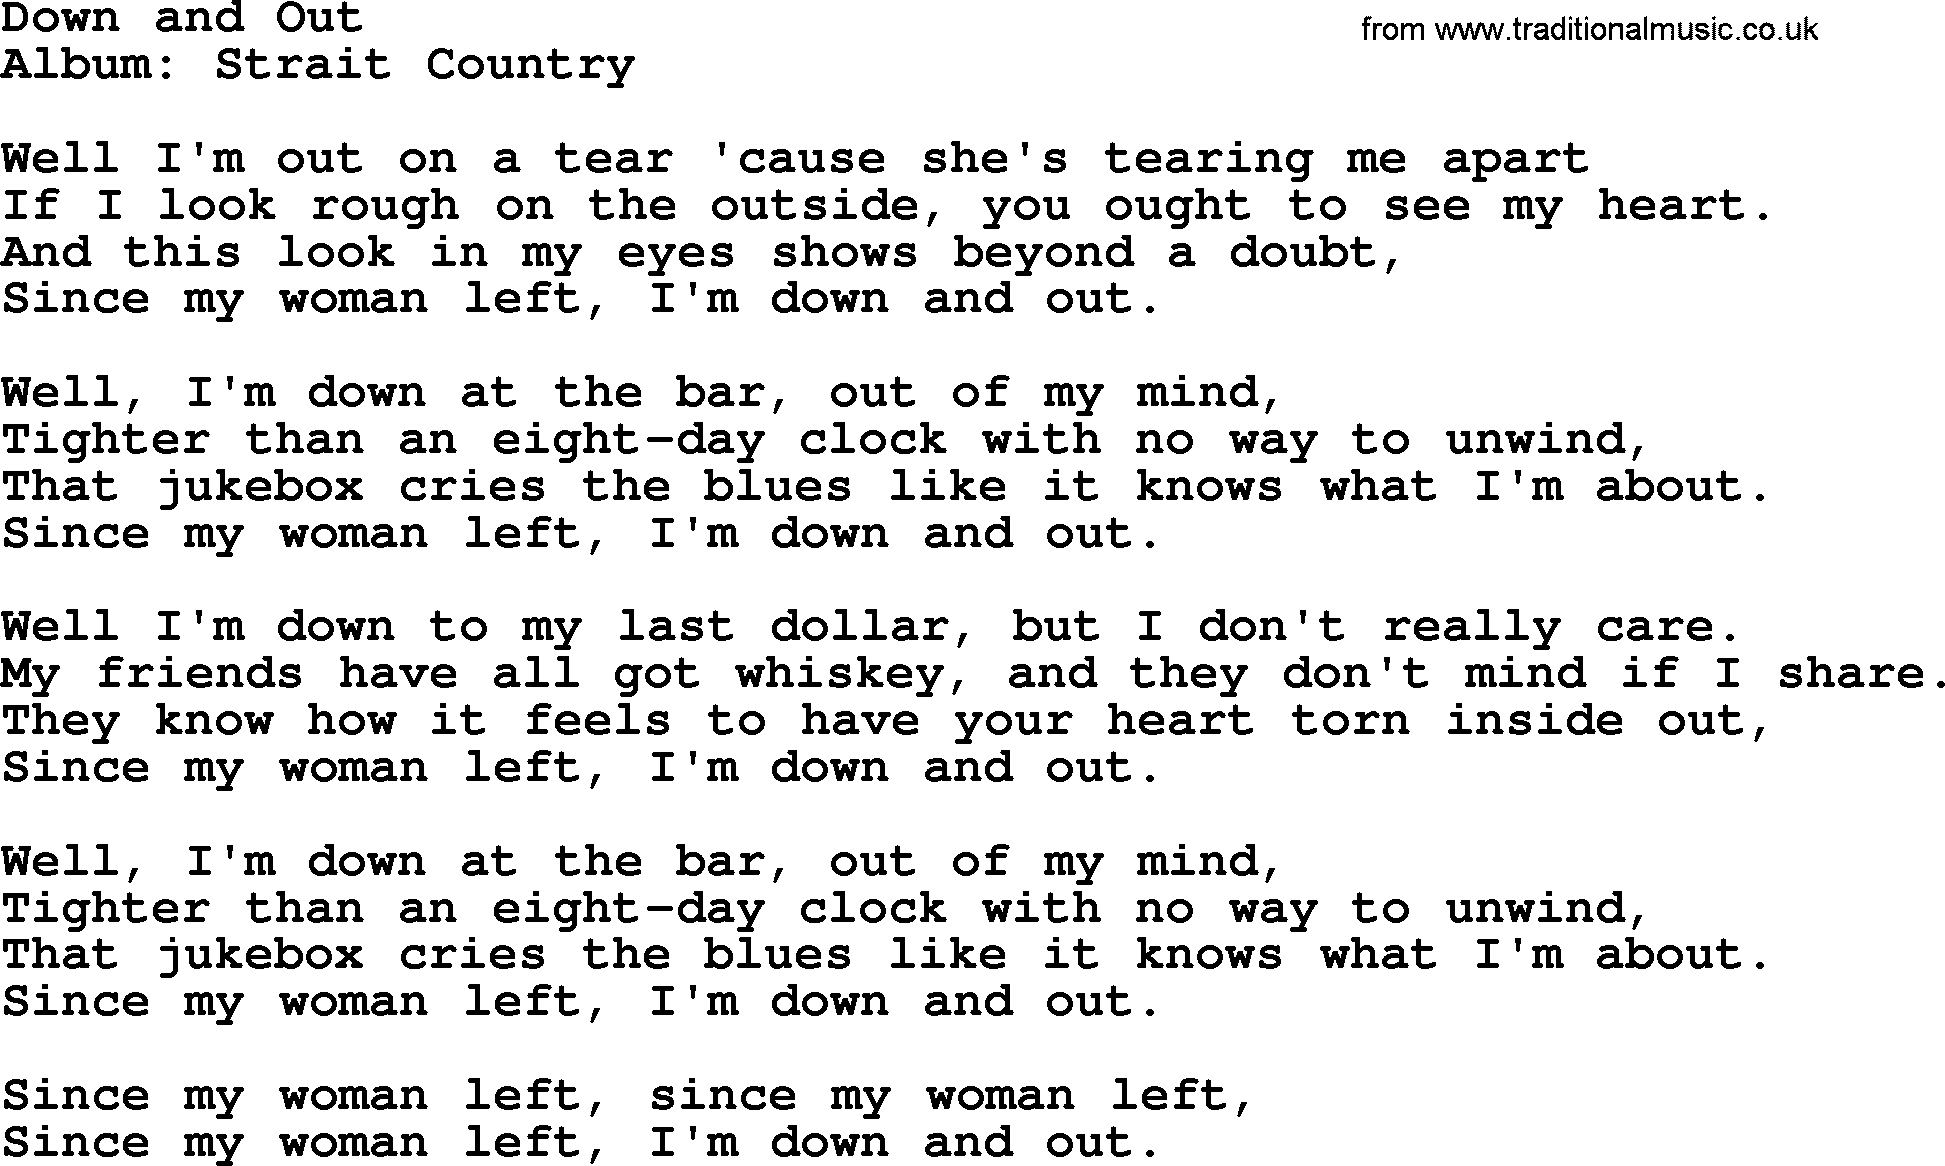 George Strait song: Down and Out, lyrics